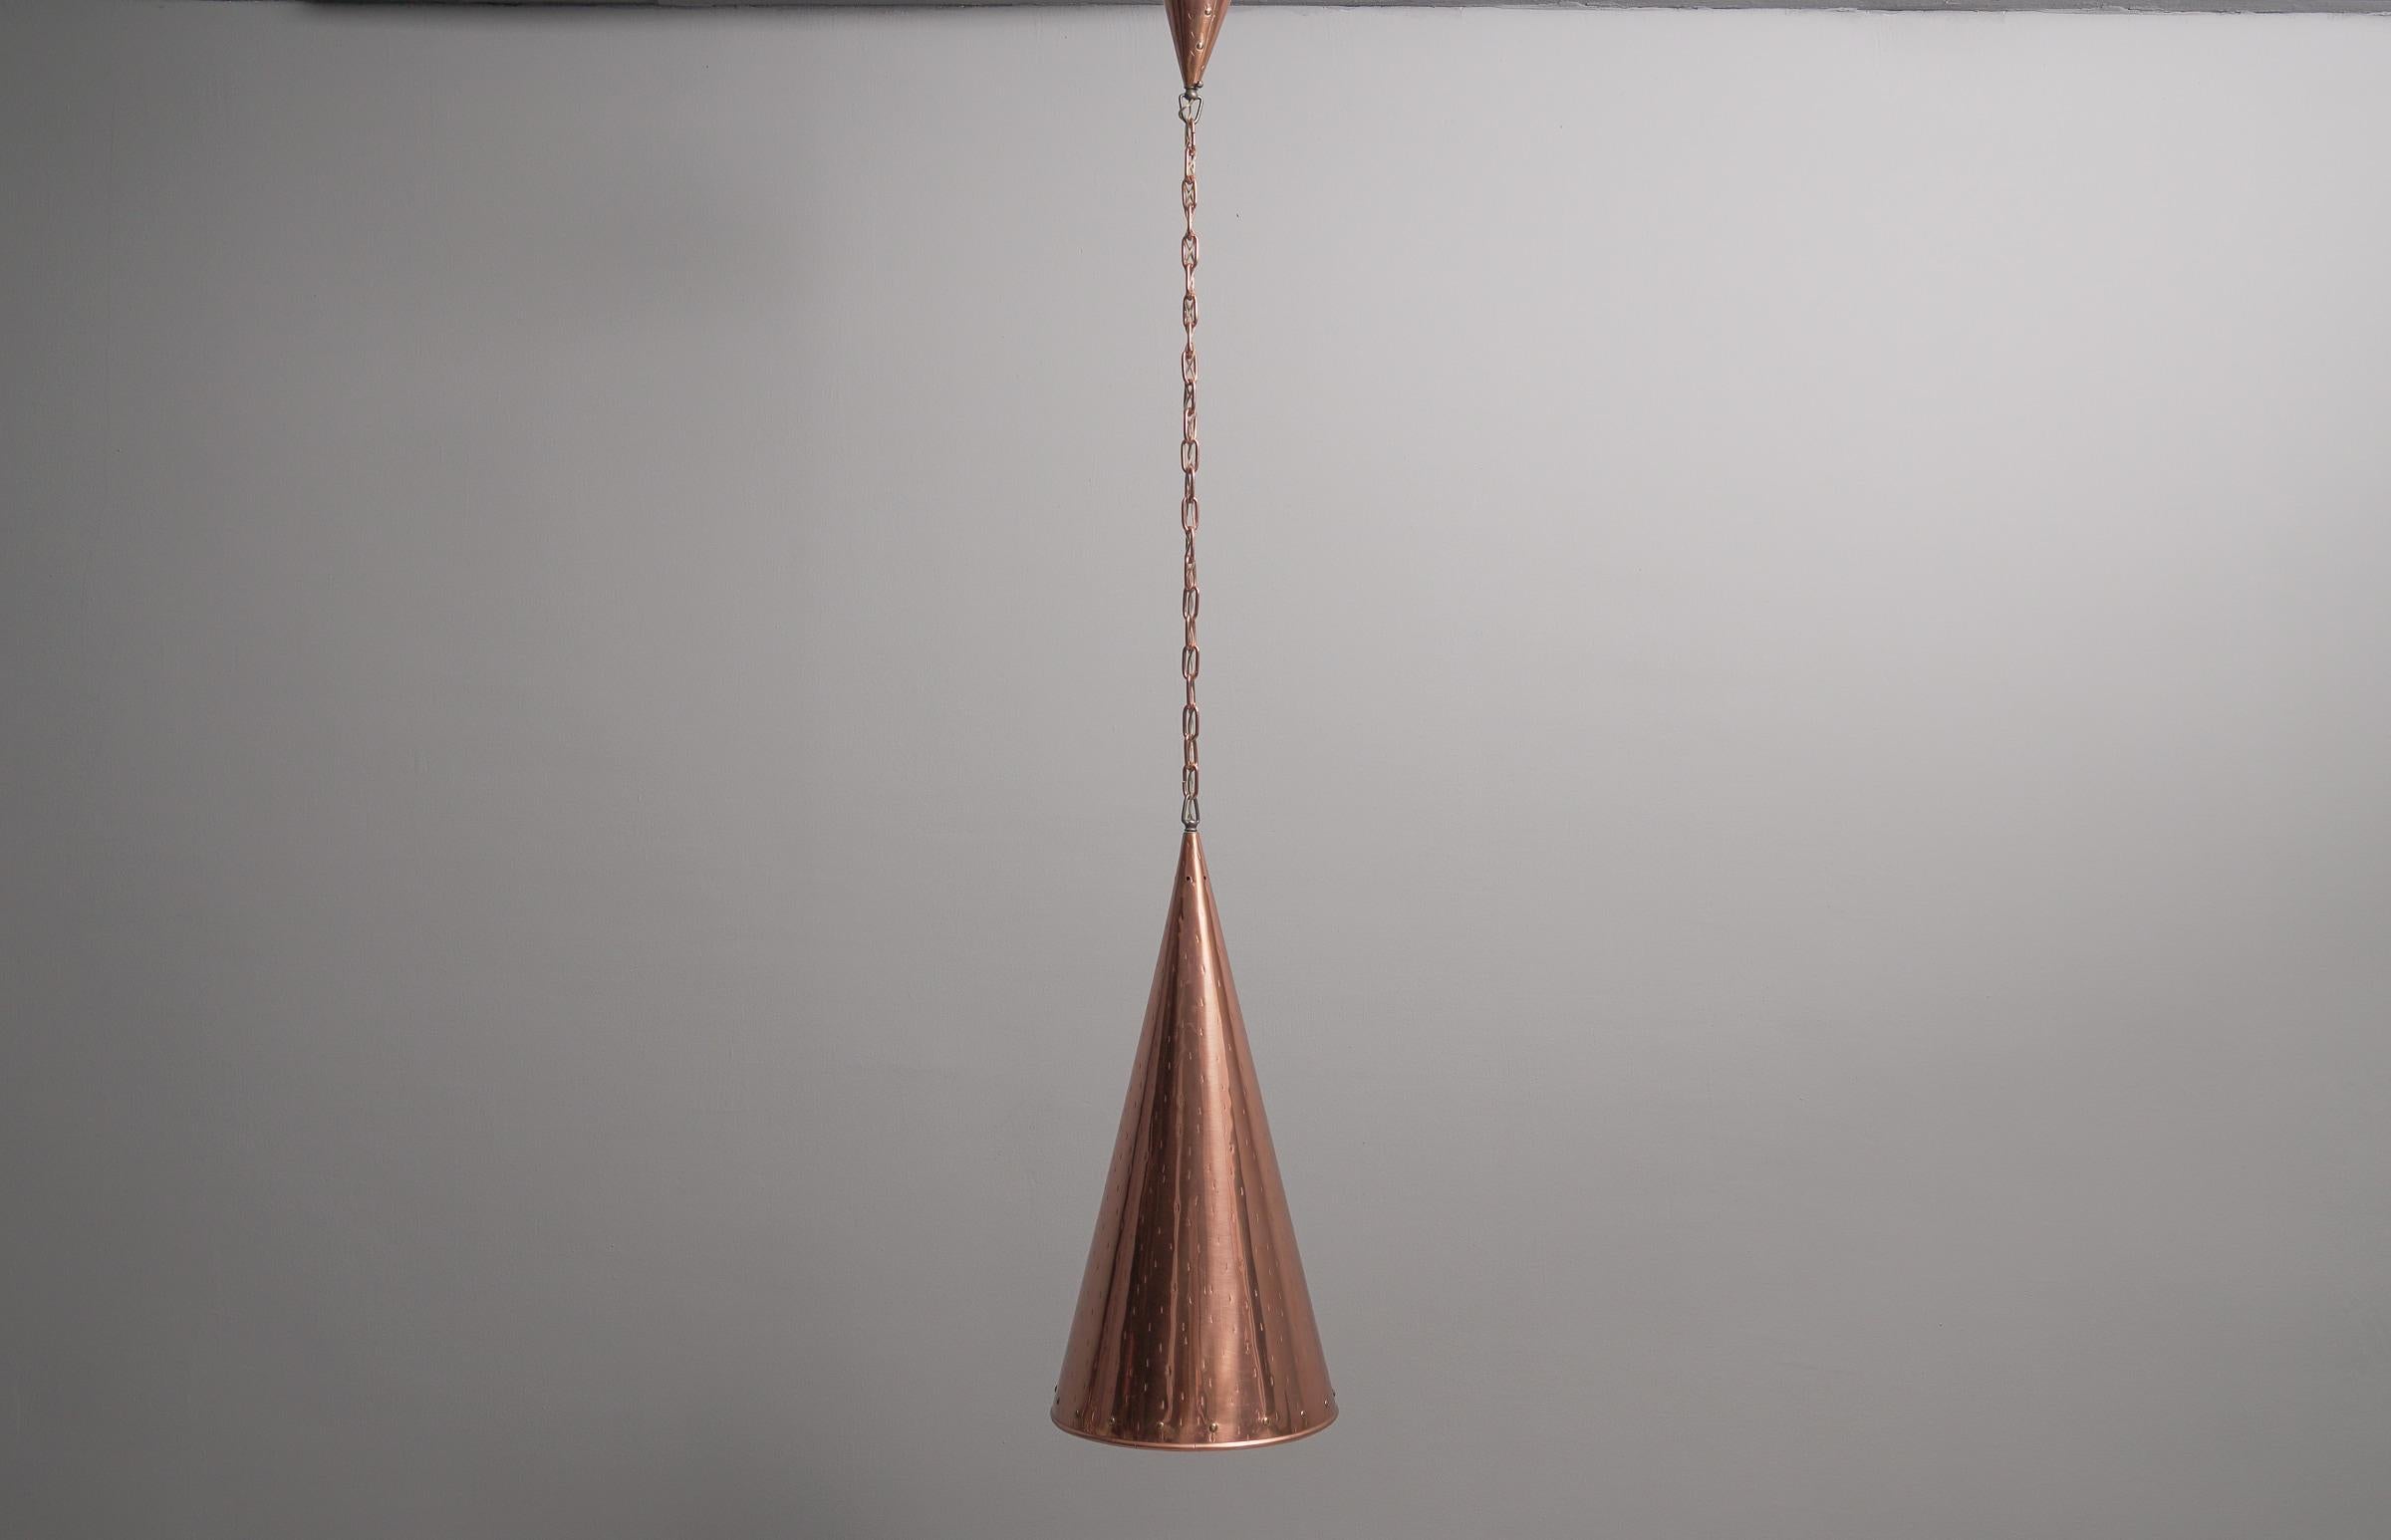 Hammered Copper Cone Pendant Lamps by E.S Horn Aalestrup, 1950s Denmark For Sale 2